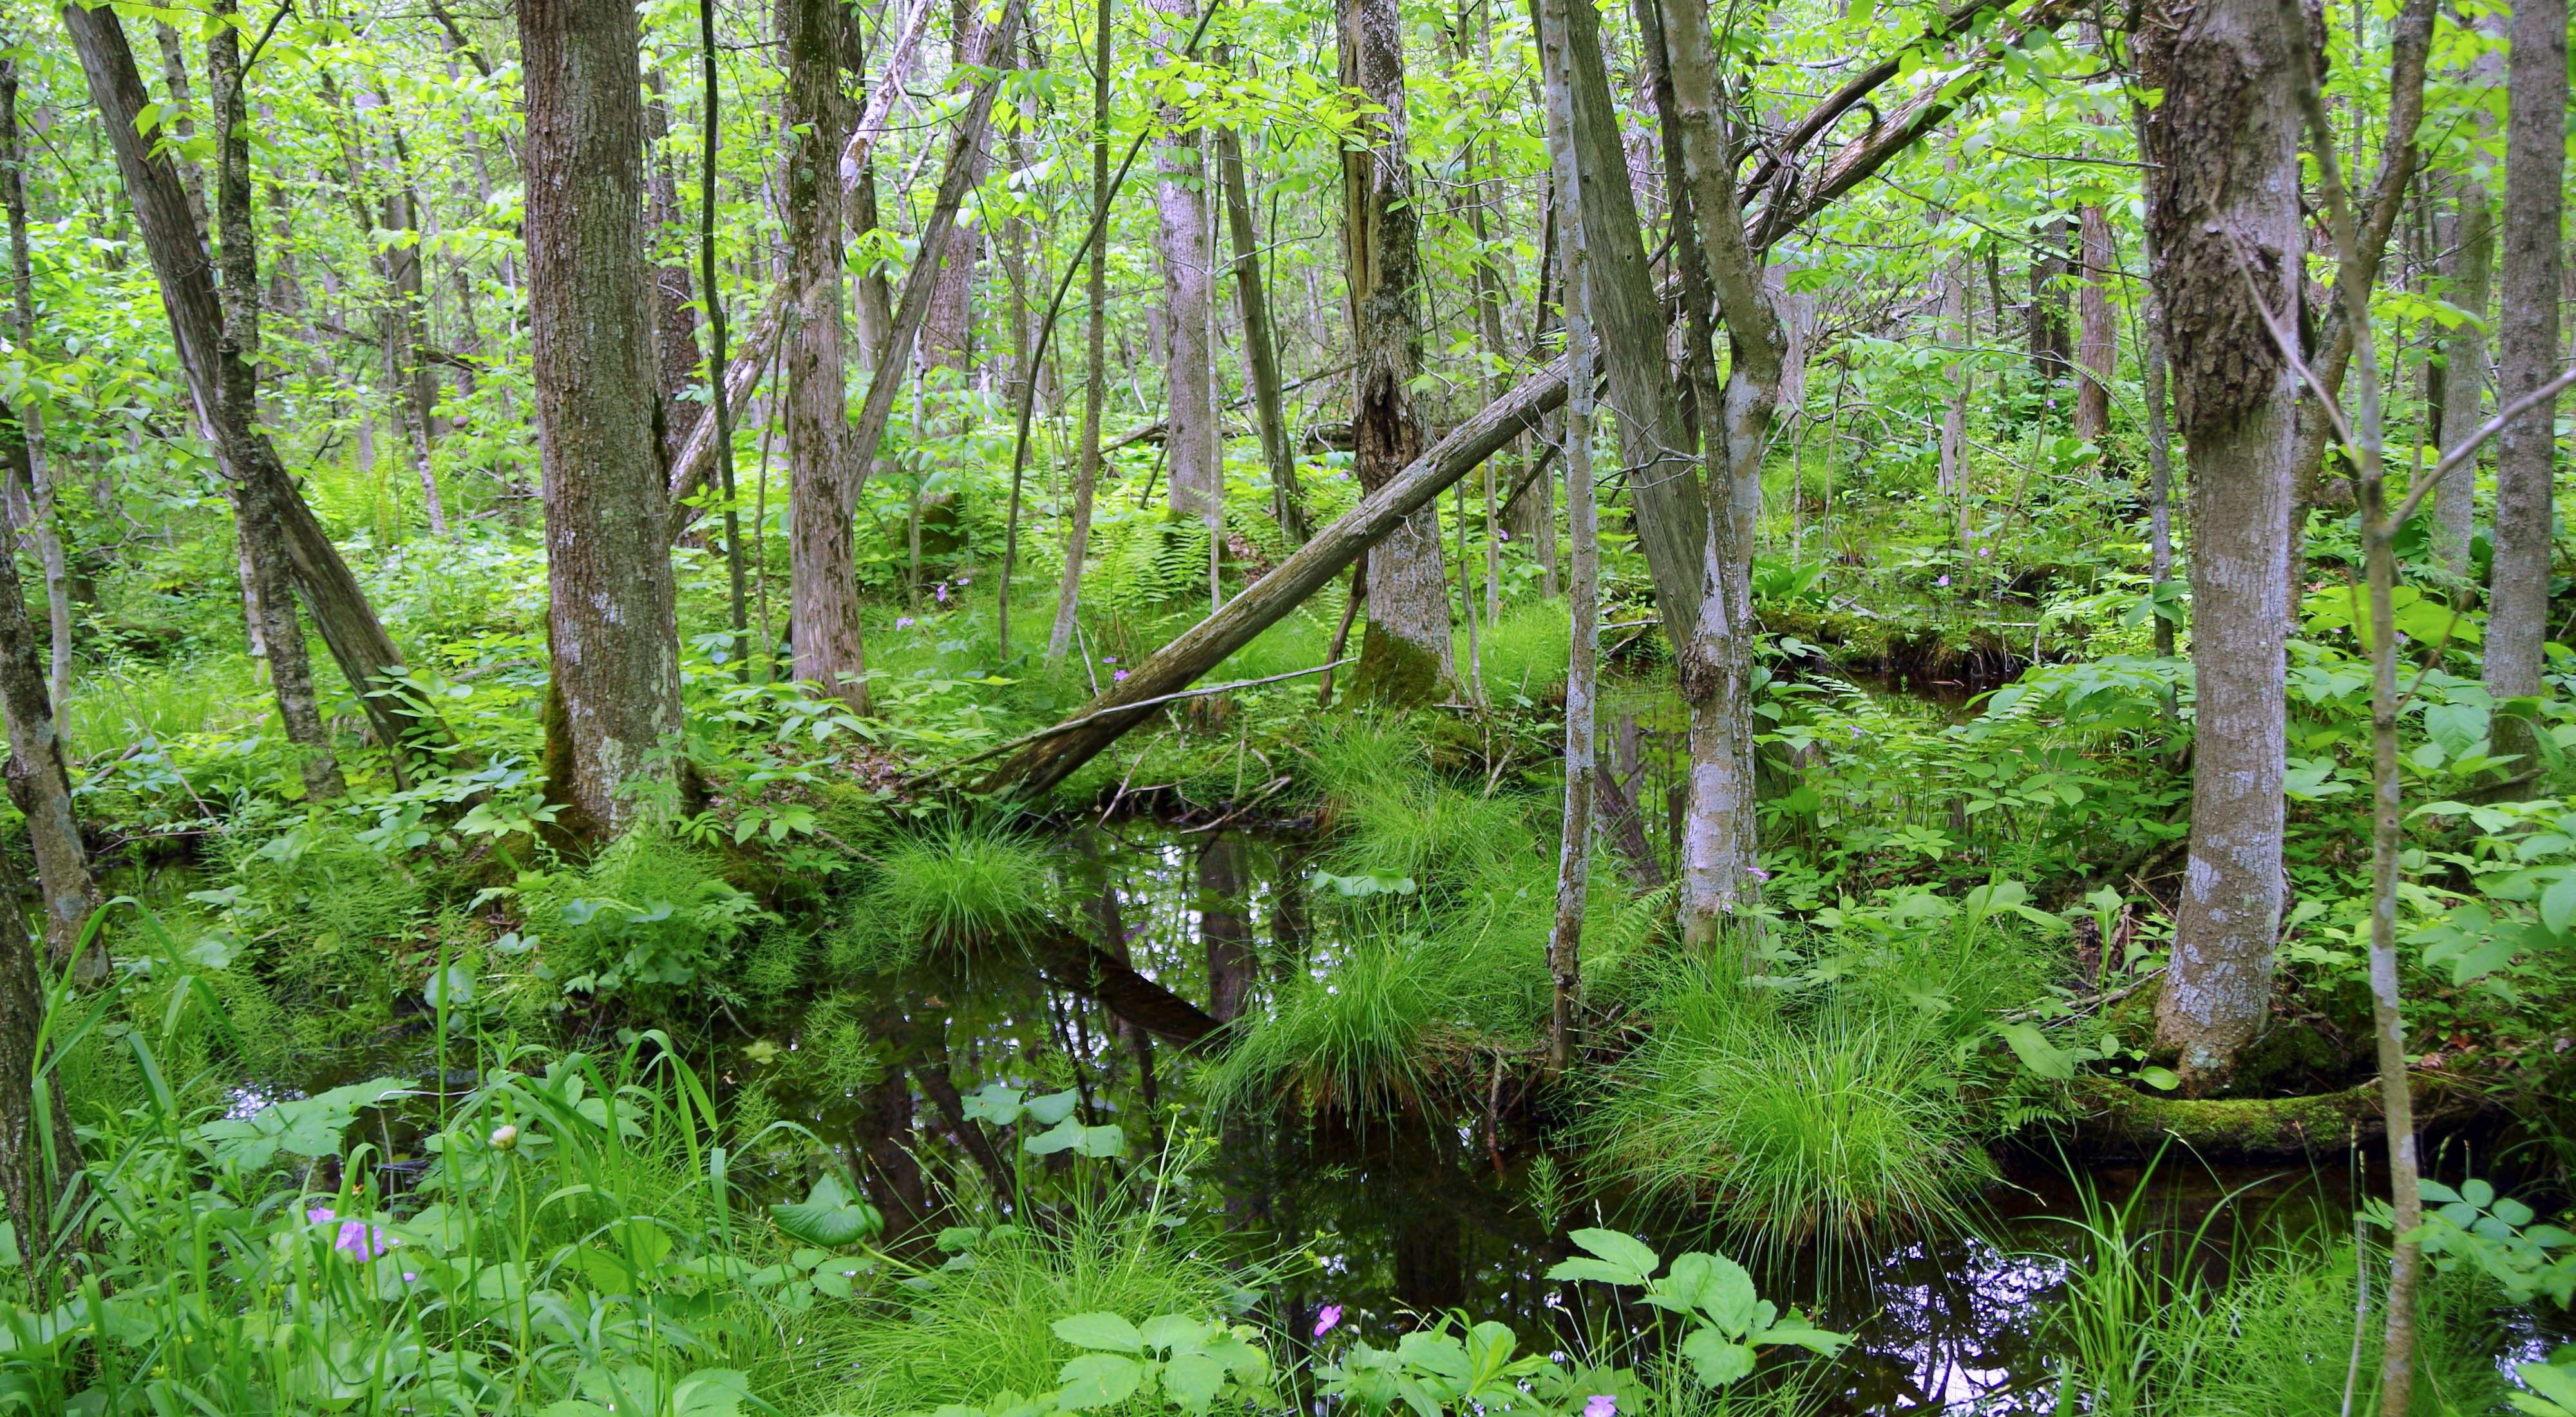 Forested wetland with trees, standing water, flowers.